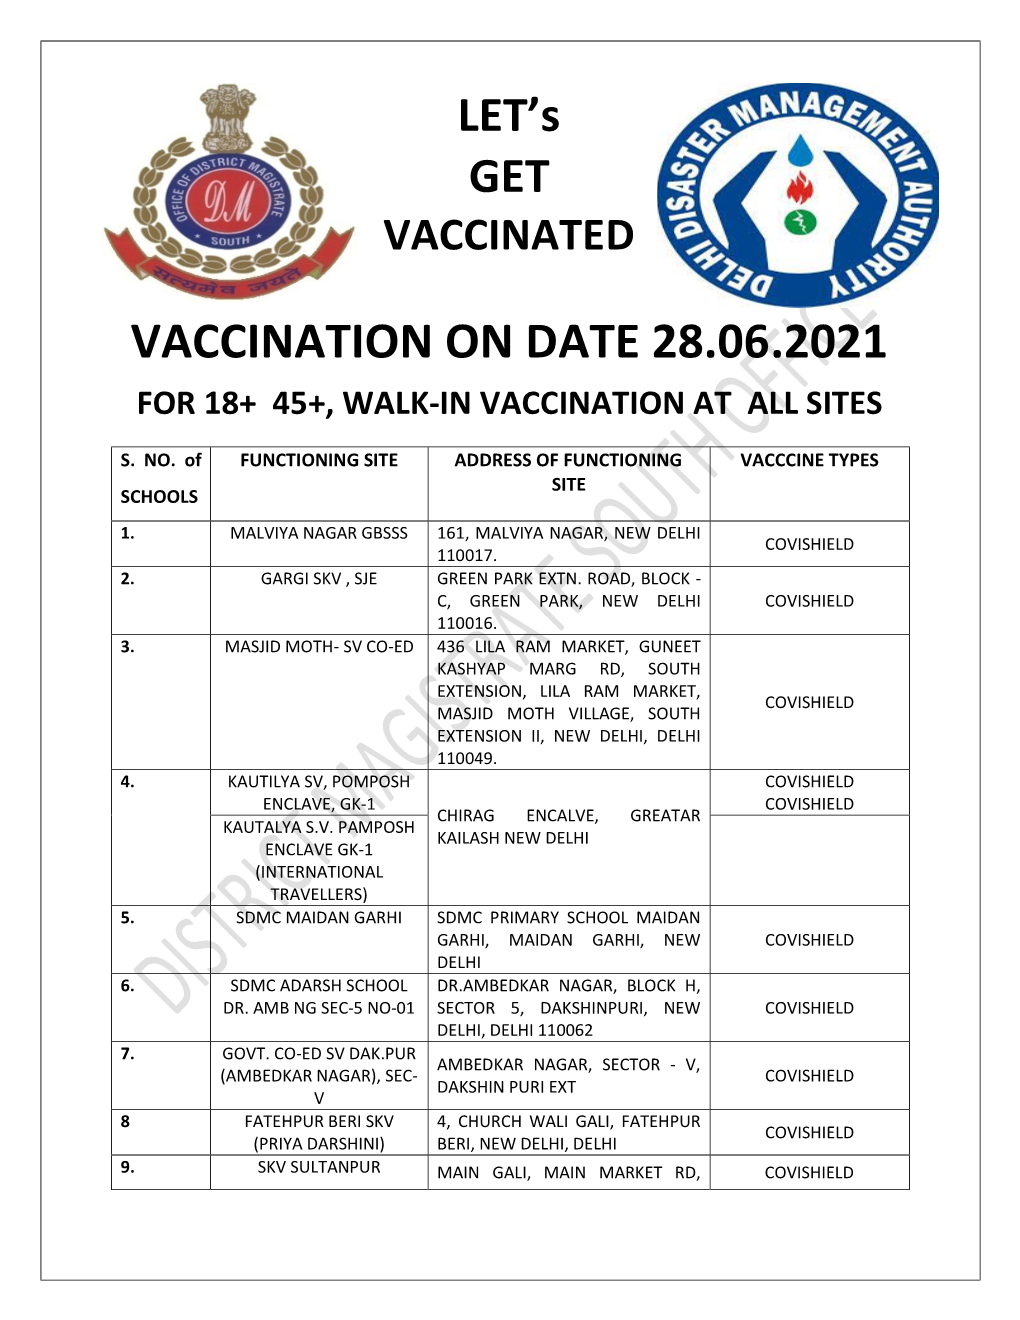 Vaccination on Date 28.06.2021 for 18+ 45+, Walk-In Vaccination at All Sites